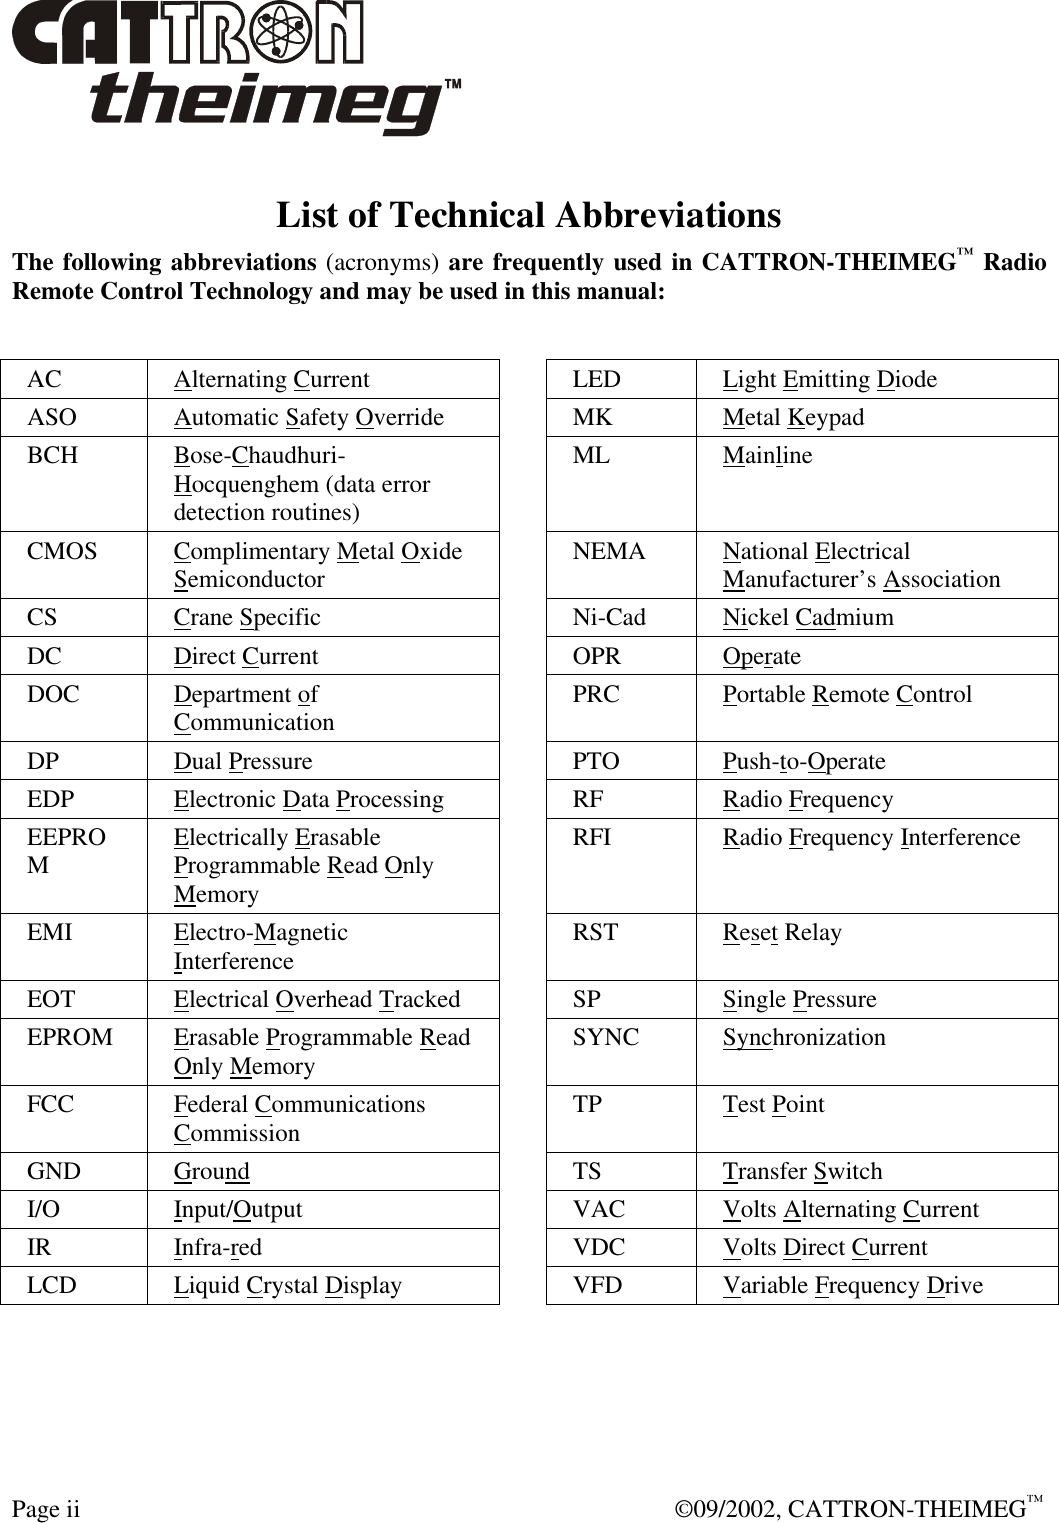  Page ii  ©09/2002, CATTRON-THEIMEG™ List of Technical Abbreviations The following abbreviations (acronyms) are frequently used in CATTRON-THEIMEG™ Radio Remote Control Technology and may be used in this manual:   AC Alternating Current  LED Light Emitting Diode ASO Automatic Safety Override  MK Metal Keypad BCH Bose-Chaudhuri-Hocquenghem (data error detection routines)  ML Mainline CMOS Complimentary Metal Oxide Semiconductor  NEMA National Electrical Manufacturer’s Association CS Crane Specific  Ni-Cad Nickel Cadmium DC Direct Current    OPR Operate DOC Department of Communication  PRC Portable Remote Control DP Dual Pressure  PTO Push-to-Operate  EDP Electronic Data Processing  RF Radio Frequency EEPROM Electrically Erasable Programmable Read Only Memory  RFI Radio Frequency Interference EMI Electro-Magnetic Interference  RST Reset Relay EOT Electrical Overhead Tracked    SP Single Pressure EPROM Erasable Programmable Read Only Memory  SYNC Synchronization FCC Federal Communications Commission  TP Test Point GND Ground  TS Transfer Switch I/O Input/Output  VAC Volts Alternating Current  IR  Infra-red  VDC Volts Direct Current  LCD Liquid Crystal Display  VFD Variable Frequency Drive  